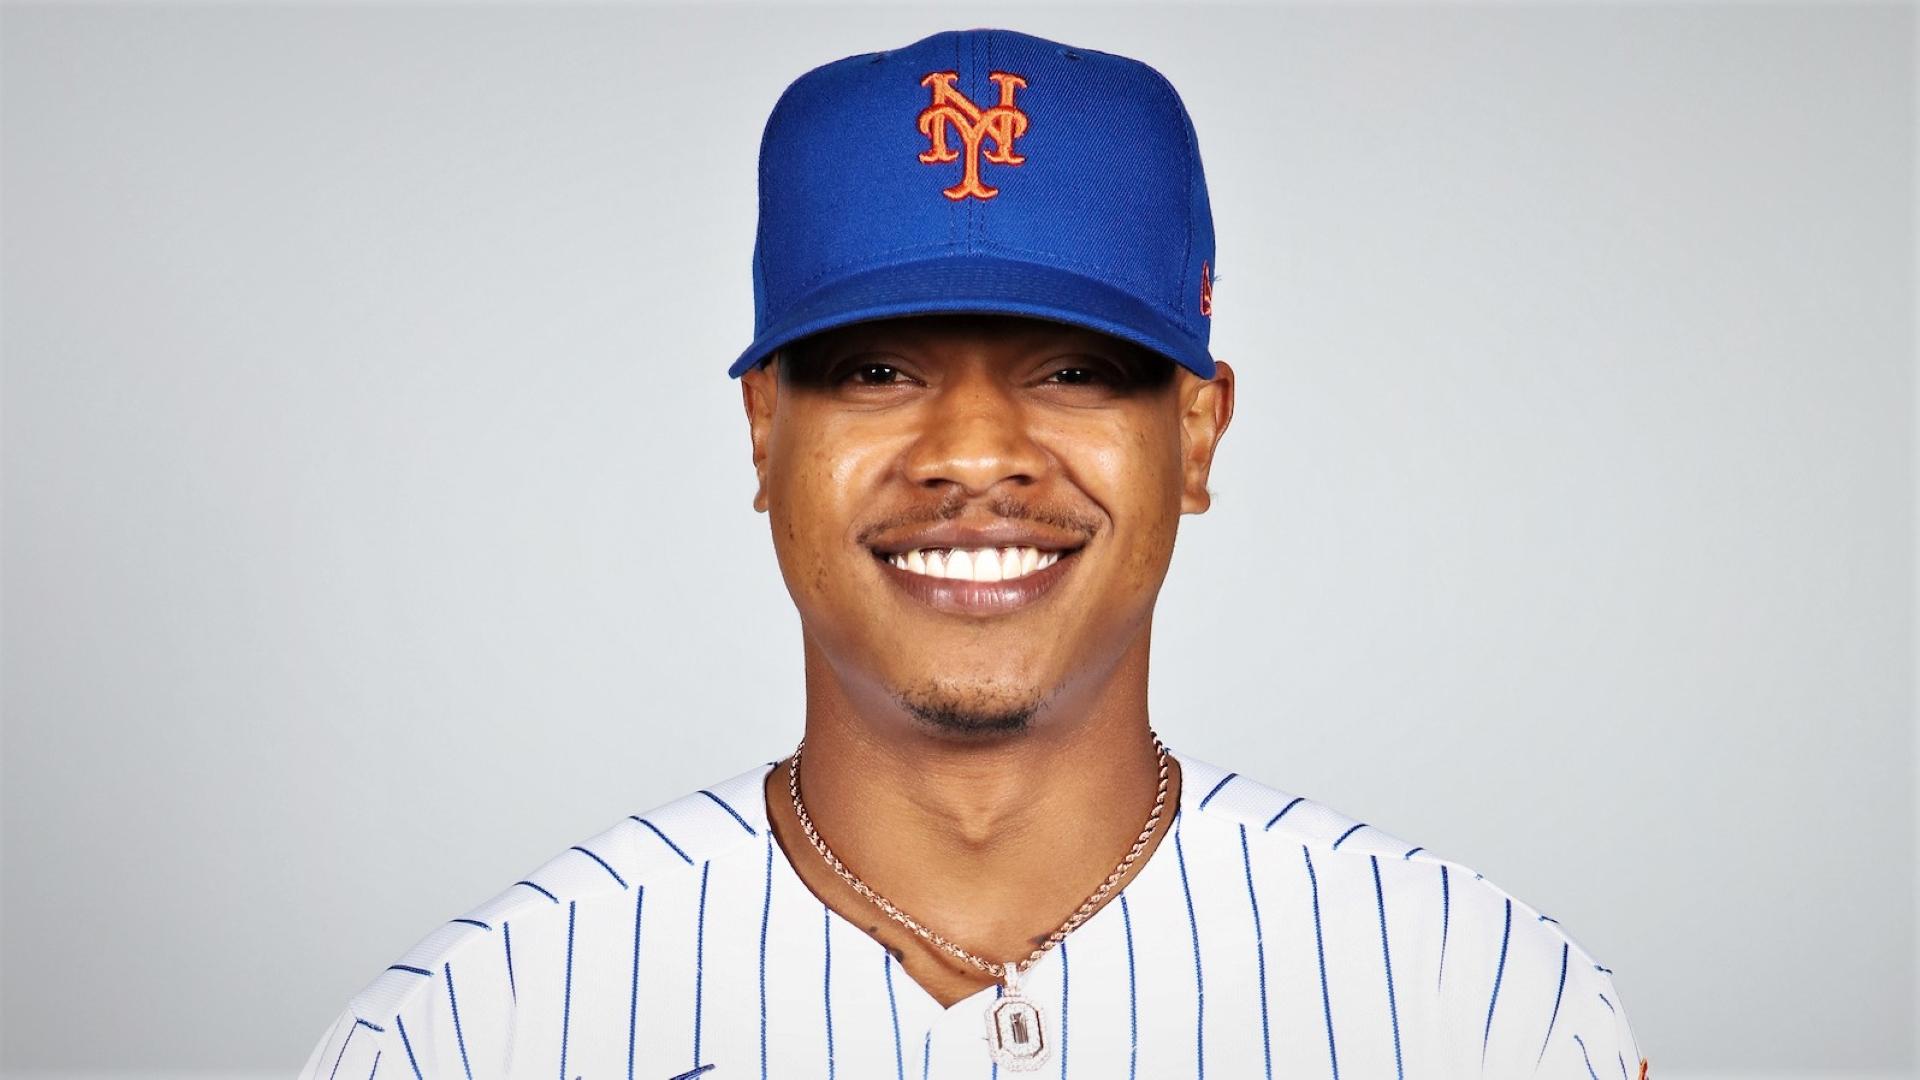 New York Mets Marcus Stroman #0 poses during media day at Clover Park. Mandatory Credit: MLB photos via USA TODAY Sports / © USA TODAY NETWORK